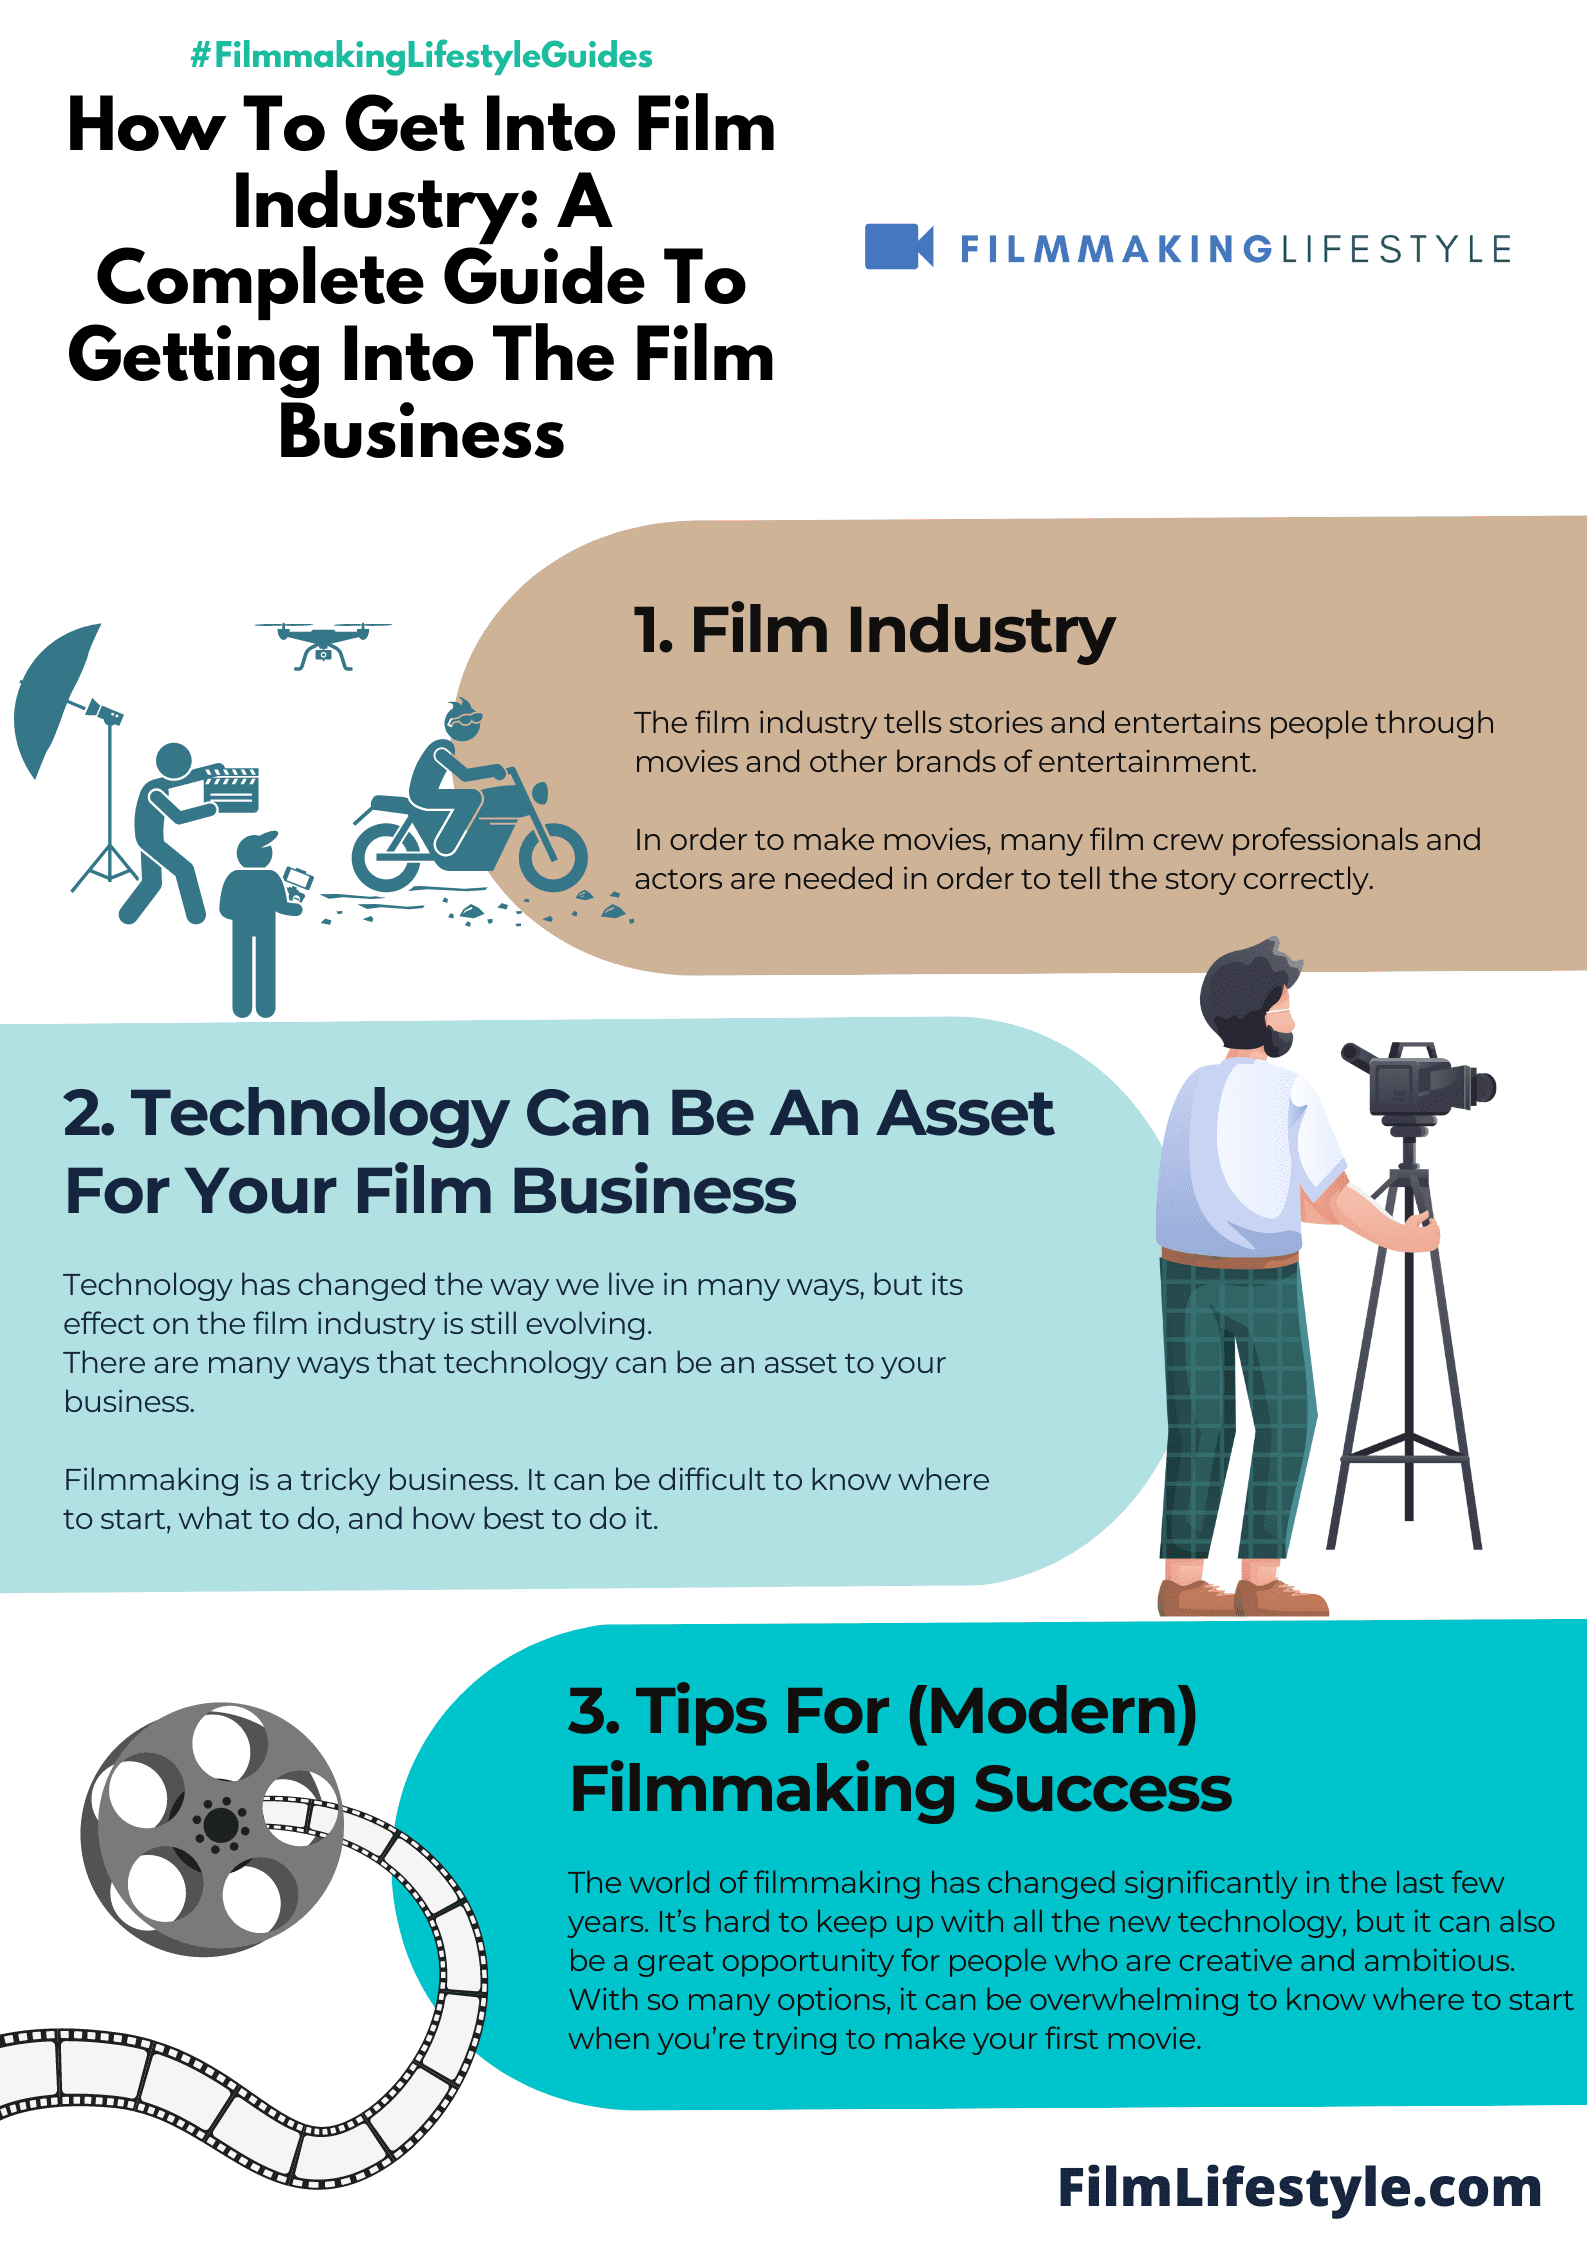 How To Get Into Film Industry